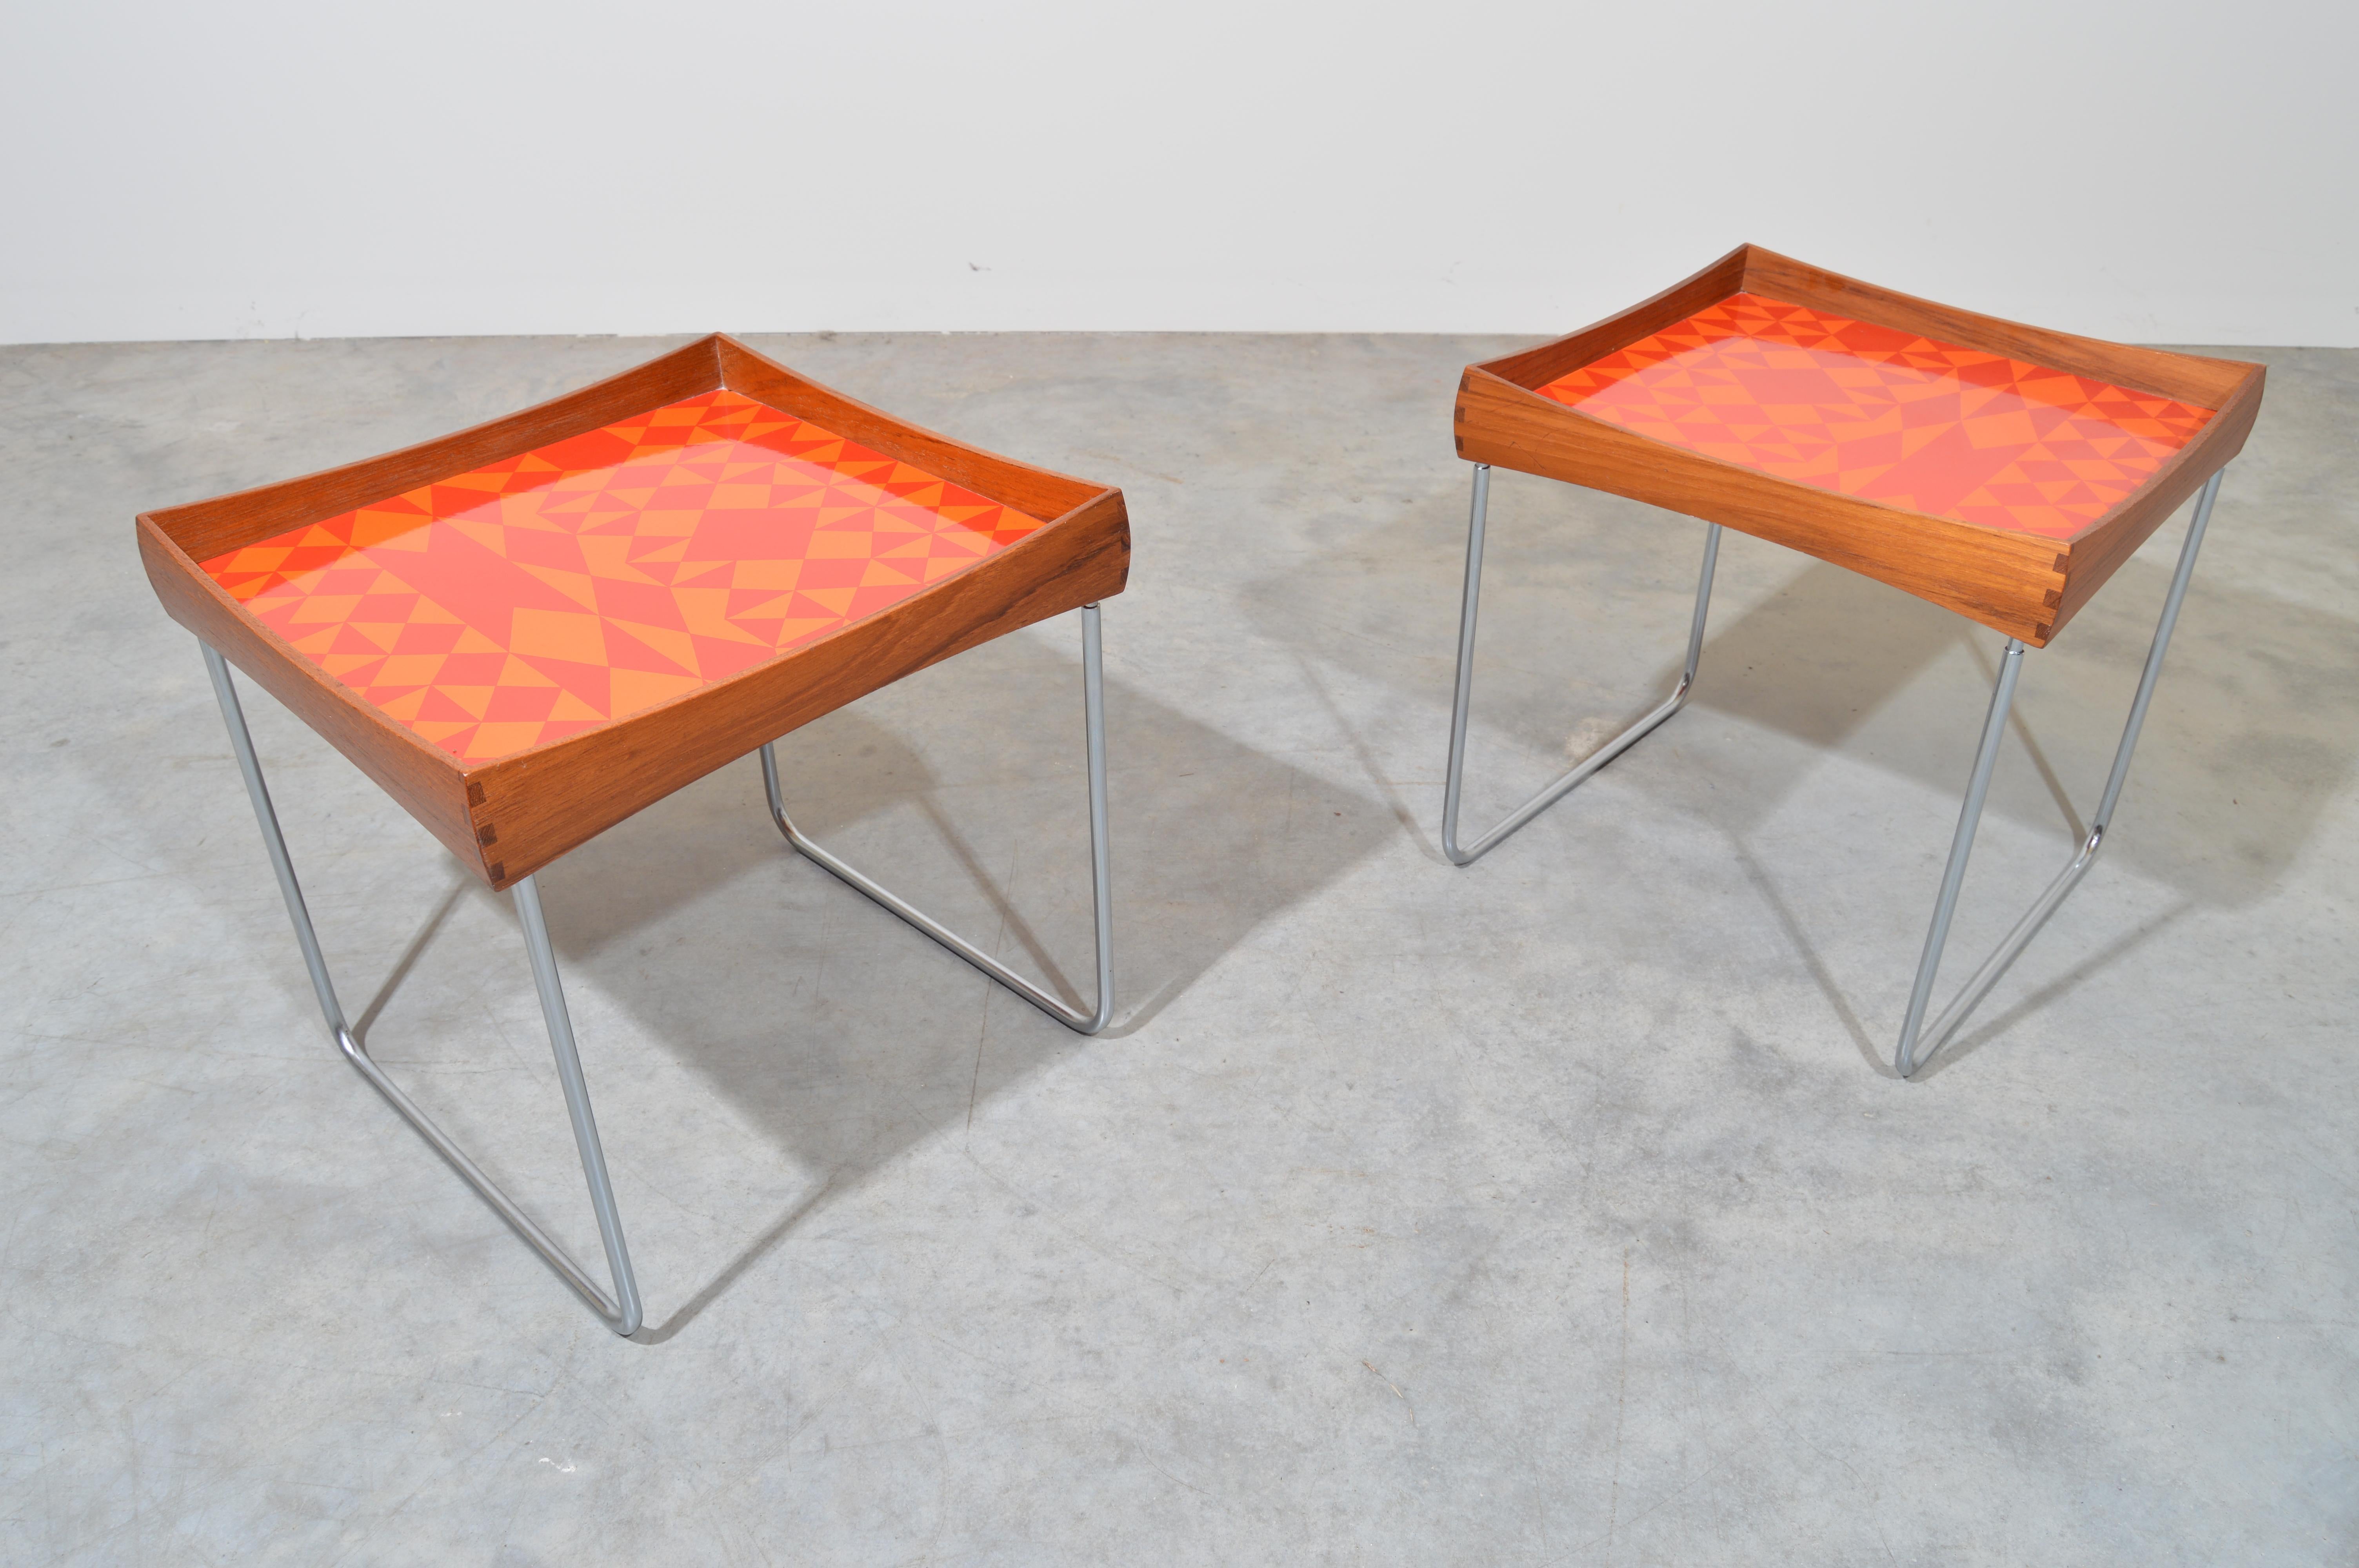 A matched pair of Norwegian enamel tray tables by Hermann Bongard for Plus, circa 1960s. Beautifully executed, removable tray tops in teak with dove tail joinery and an abstract enamel pattern. Legs collapse for easy storage.
Outstanding overall